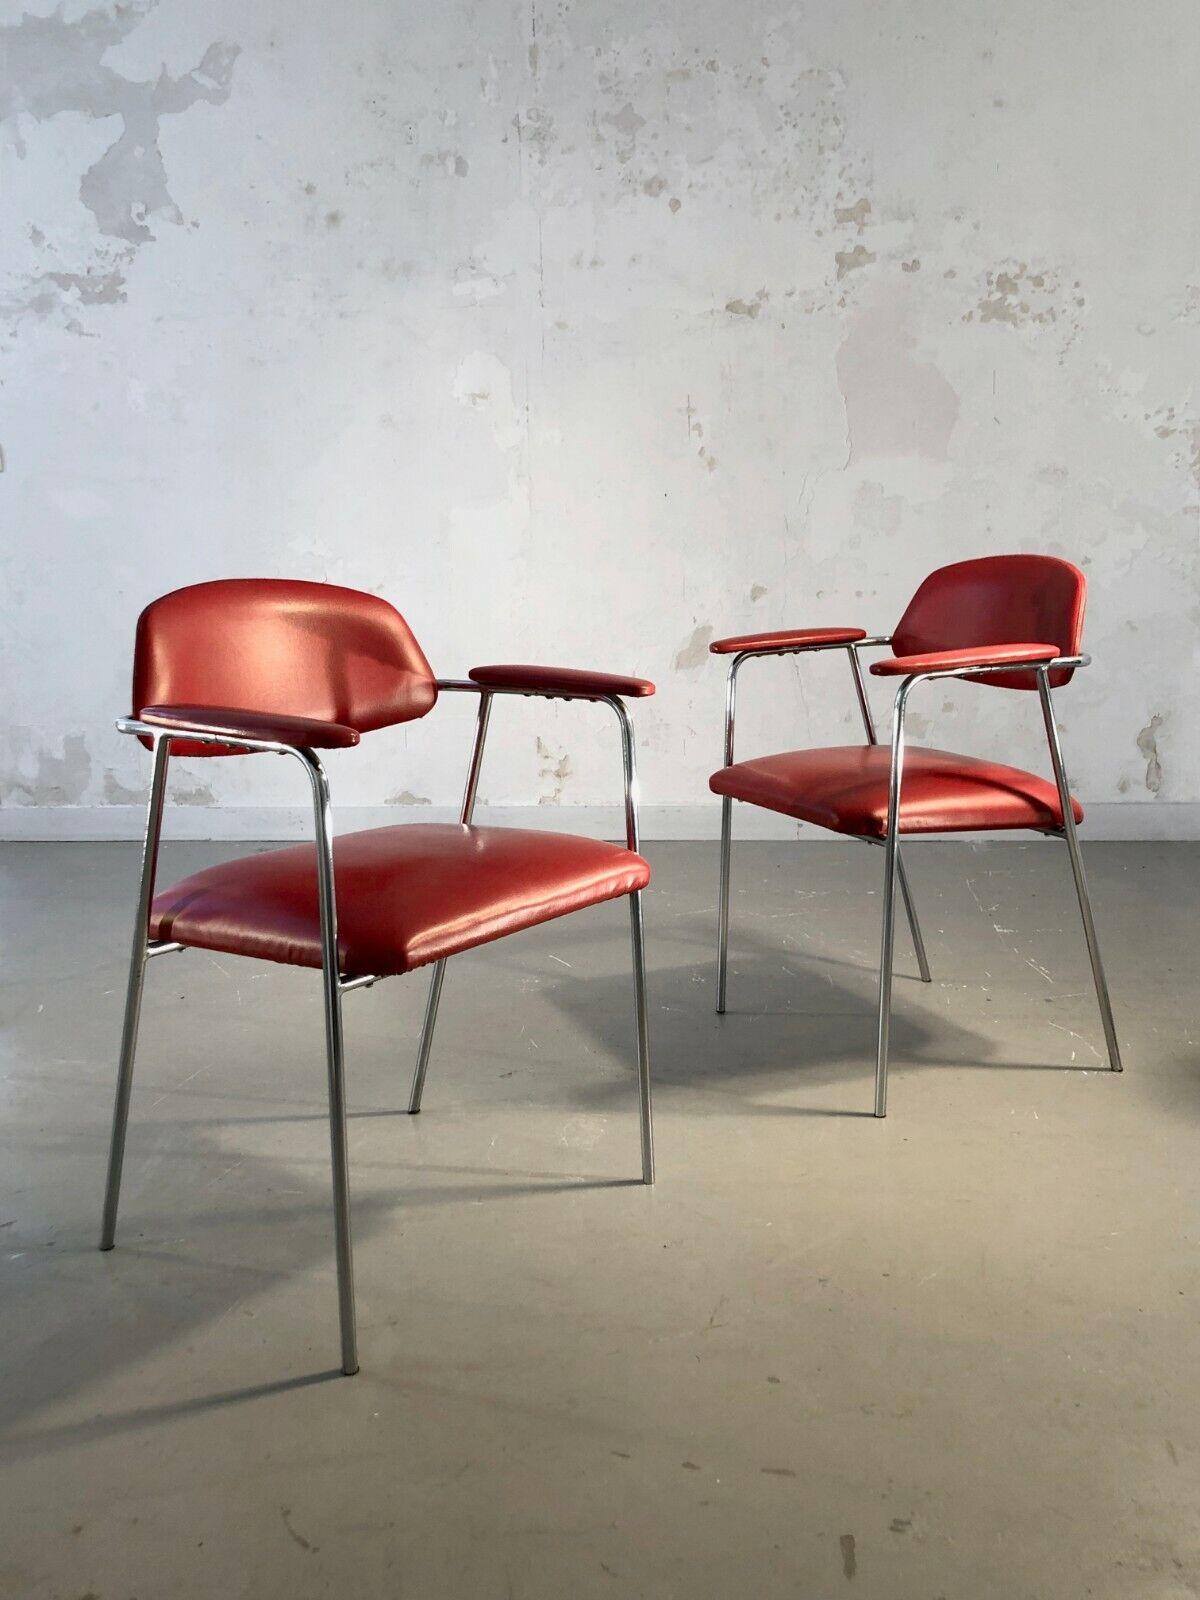 A pair of chairs with armrests, Modernist, Free Form, chromed tubular metal structures, comfortable seats and armrests in superb red imitation leather, attributed to Pierre Paulin, Steiner edition, France 1950-1960. Steiner labels under each